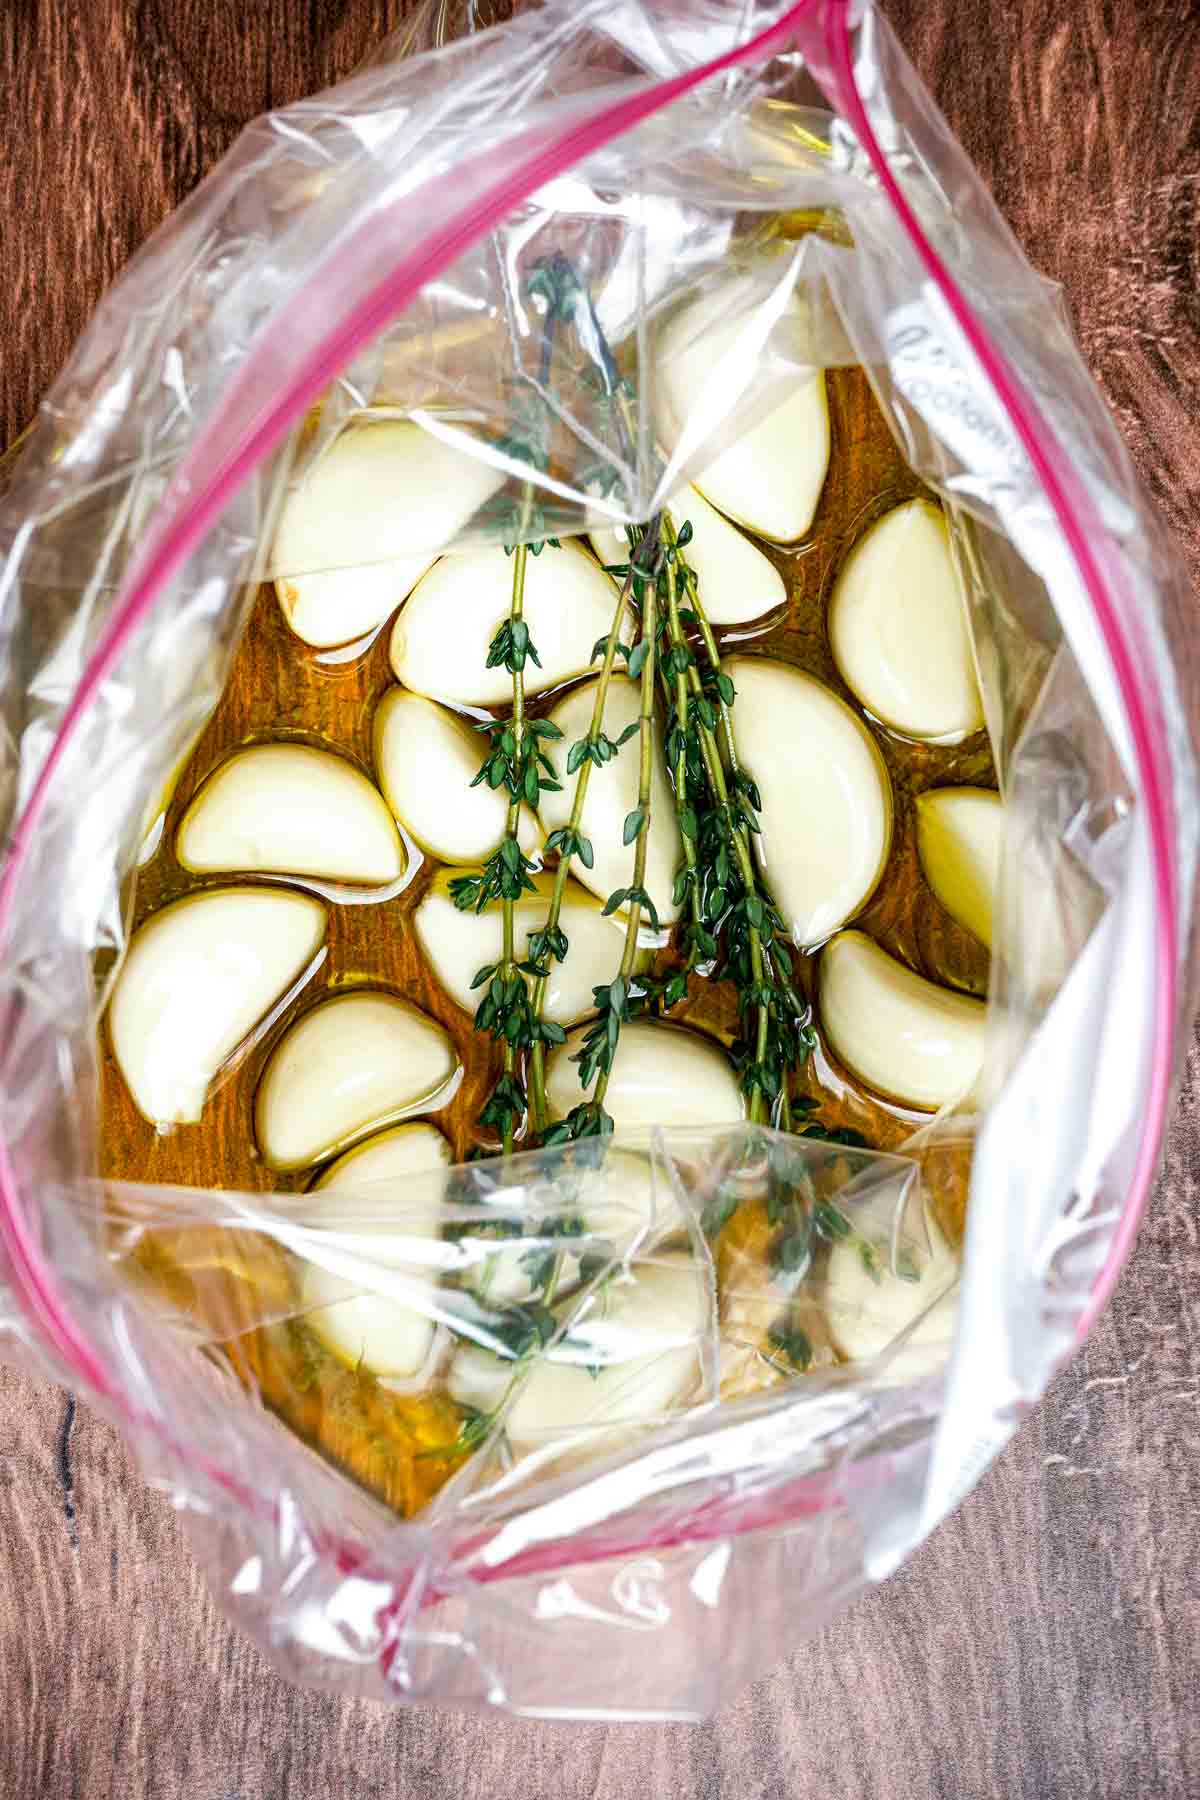 garlic cloves, thyme and oil in a plastic bag